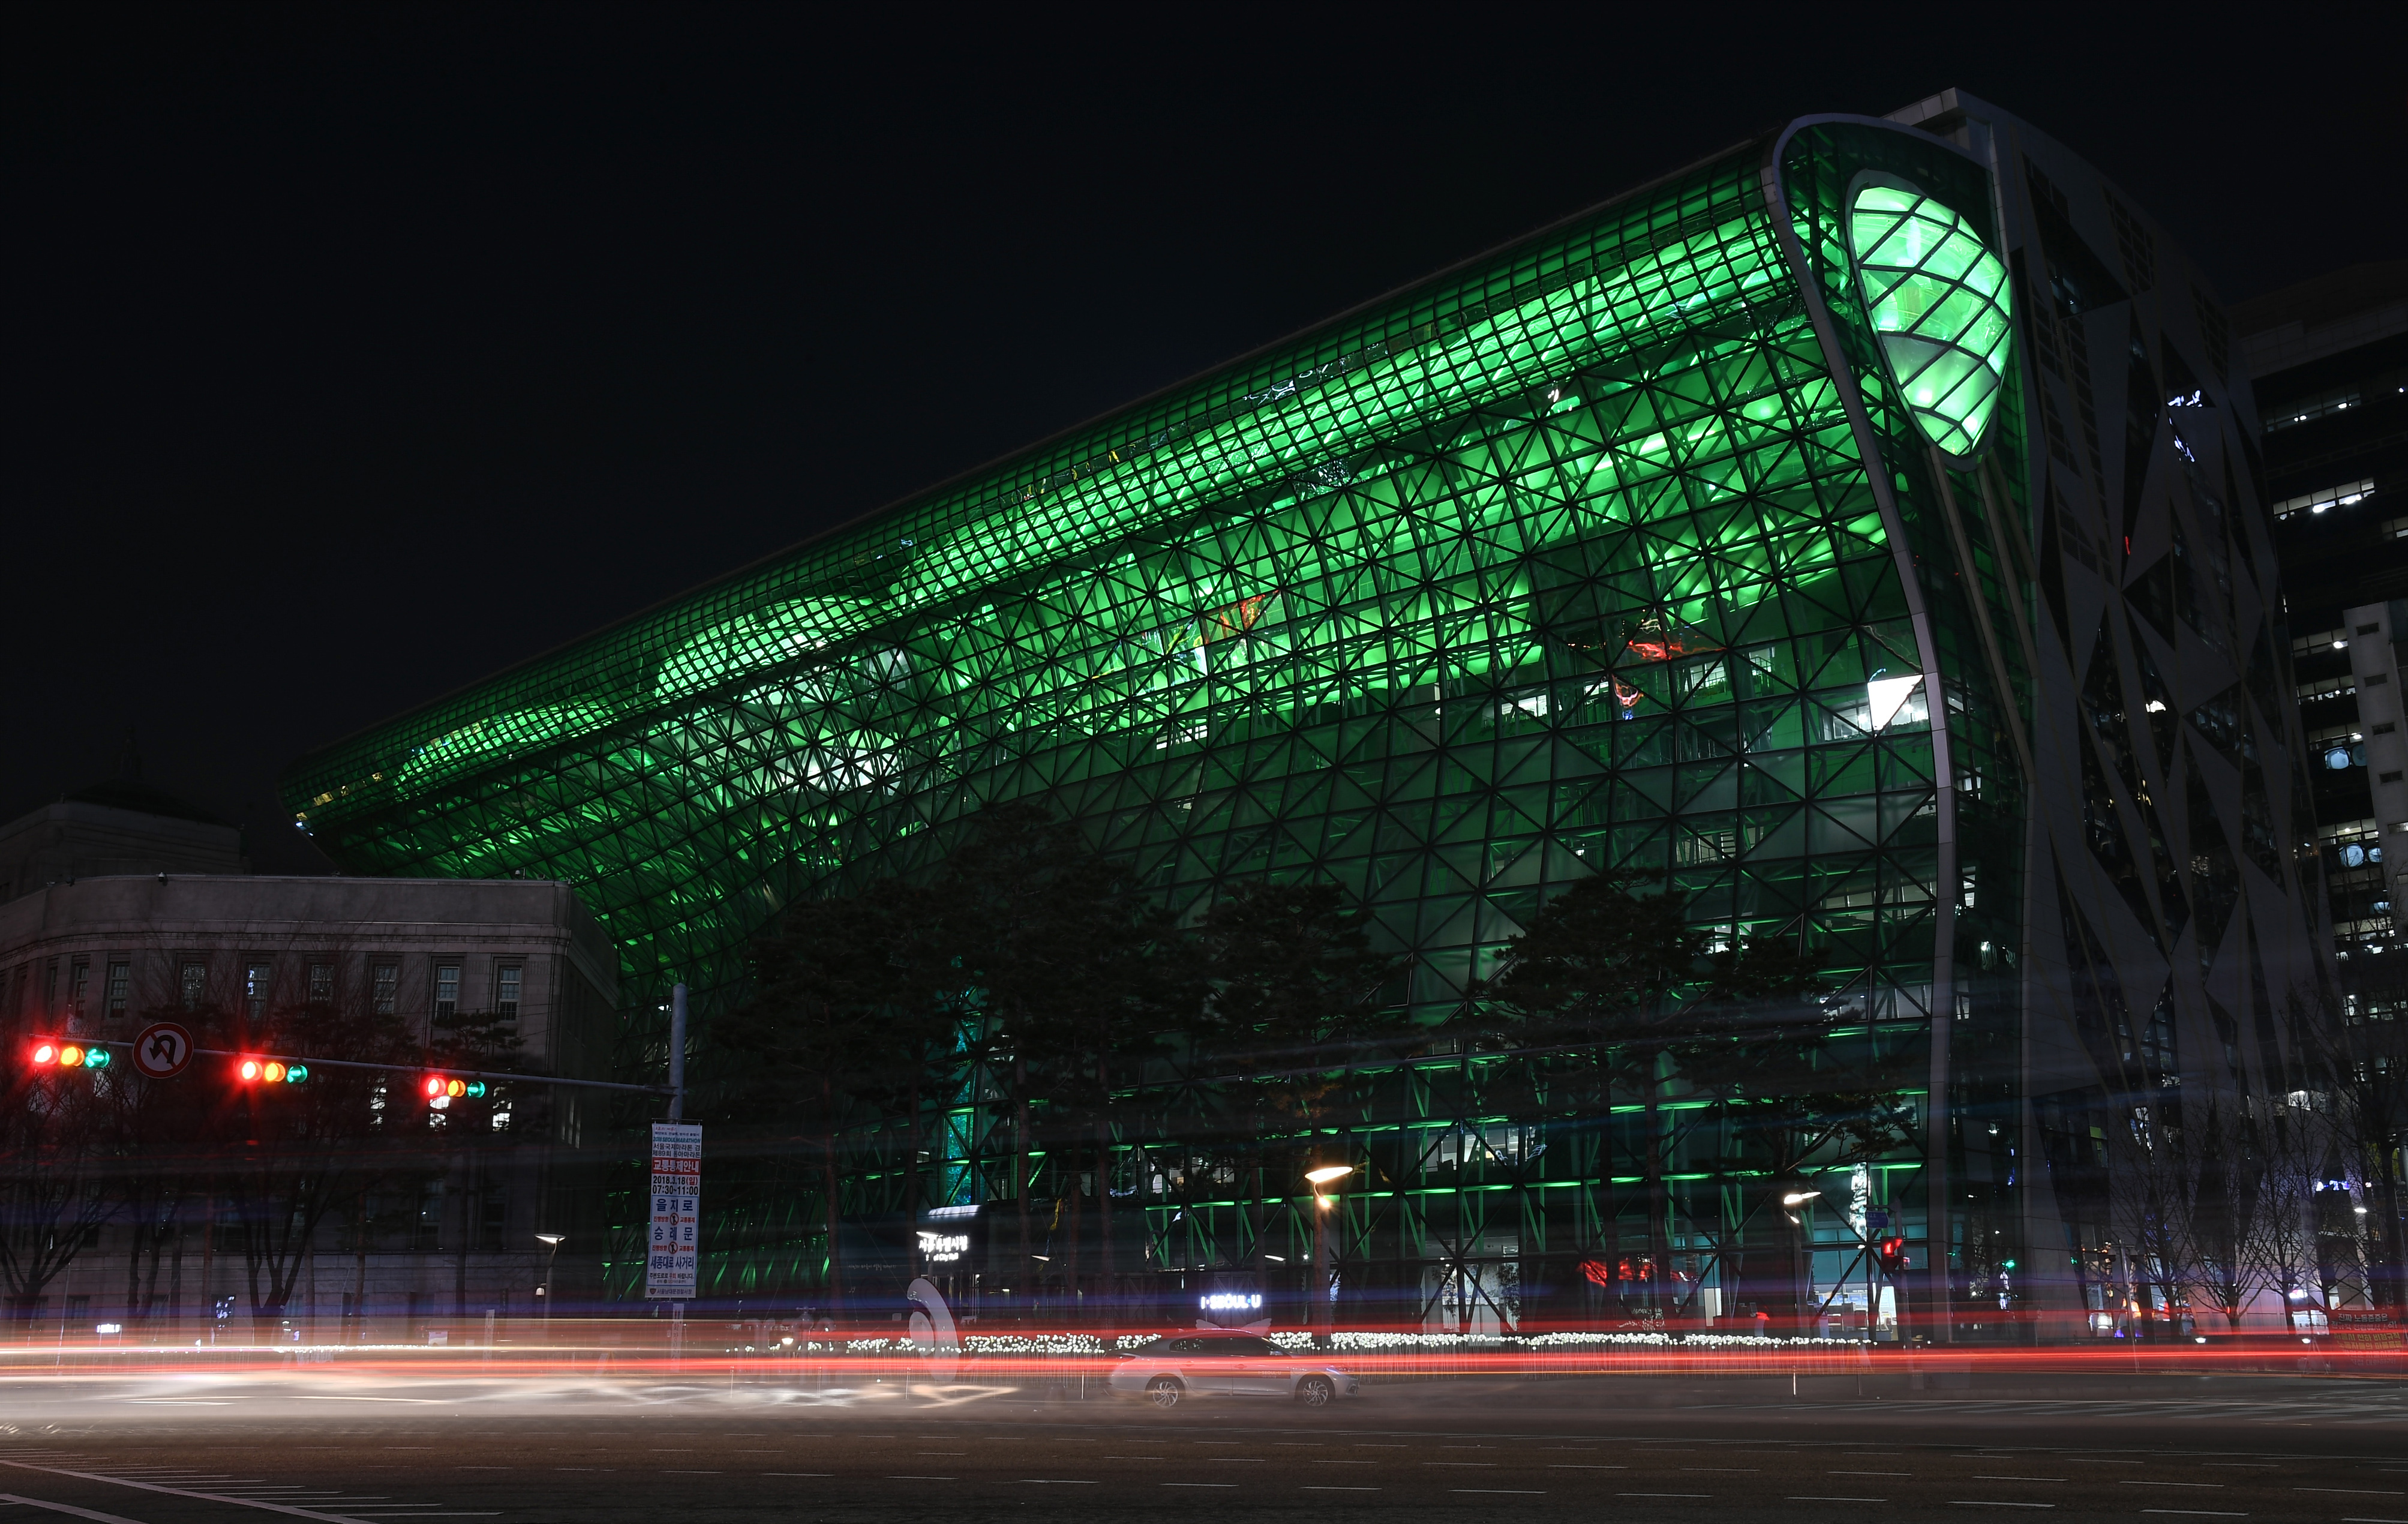  Not to be outdone, City Hall in Seoul, South Korea, also went green